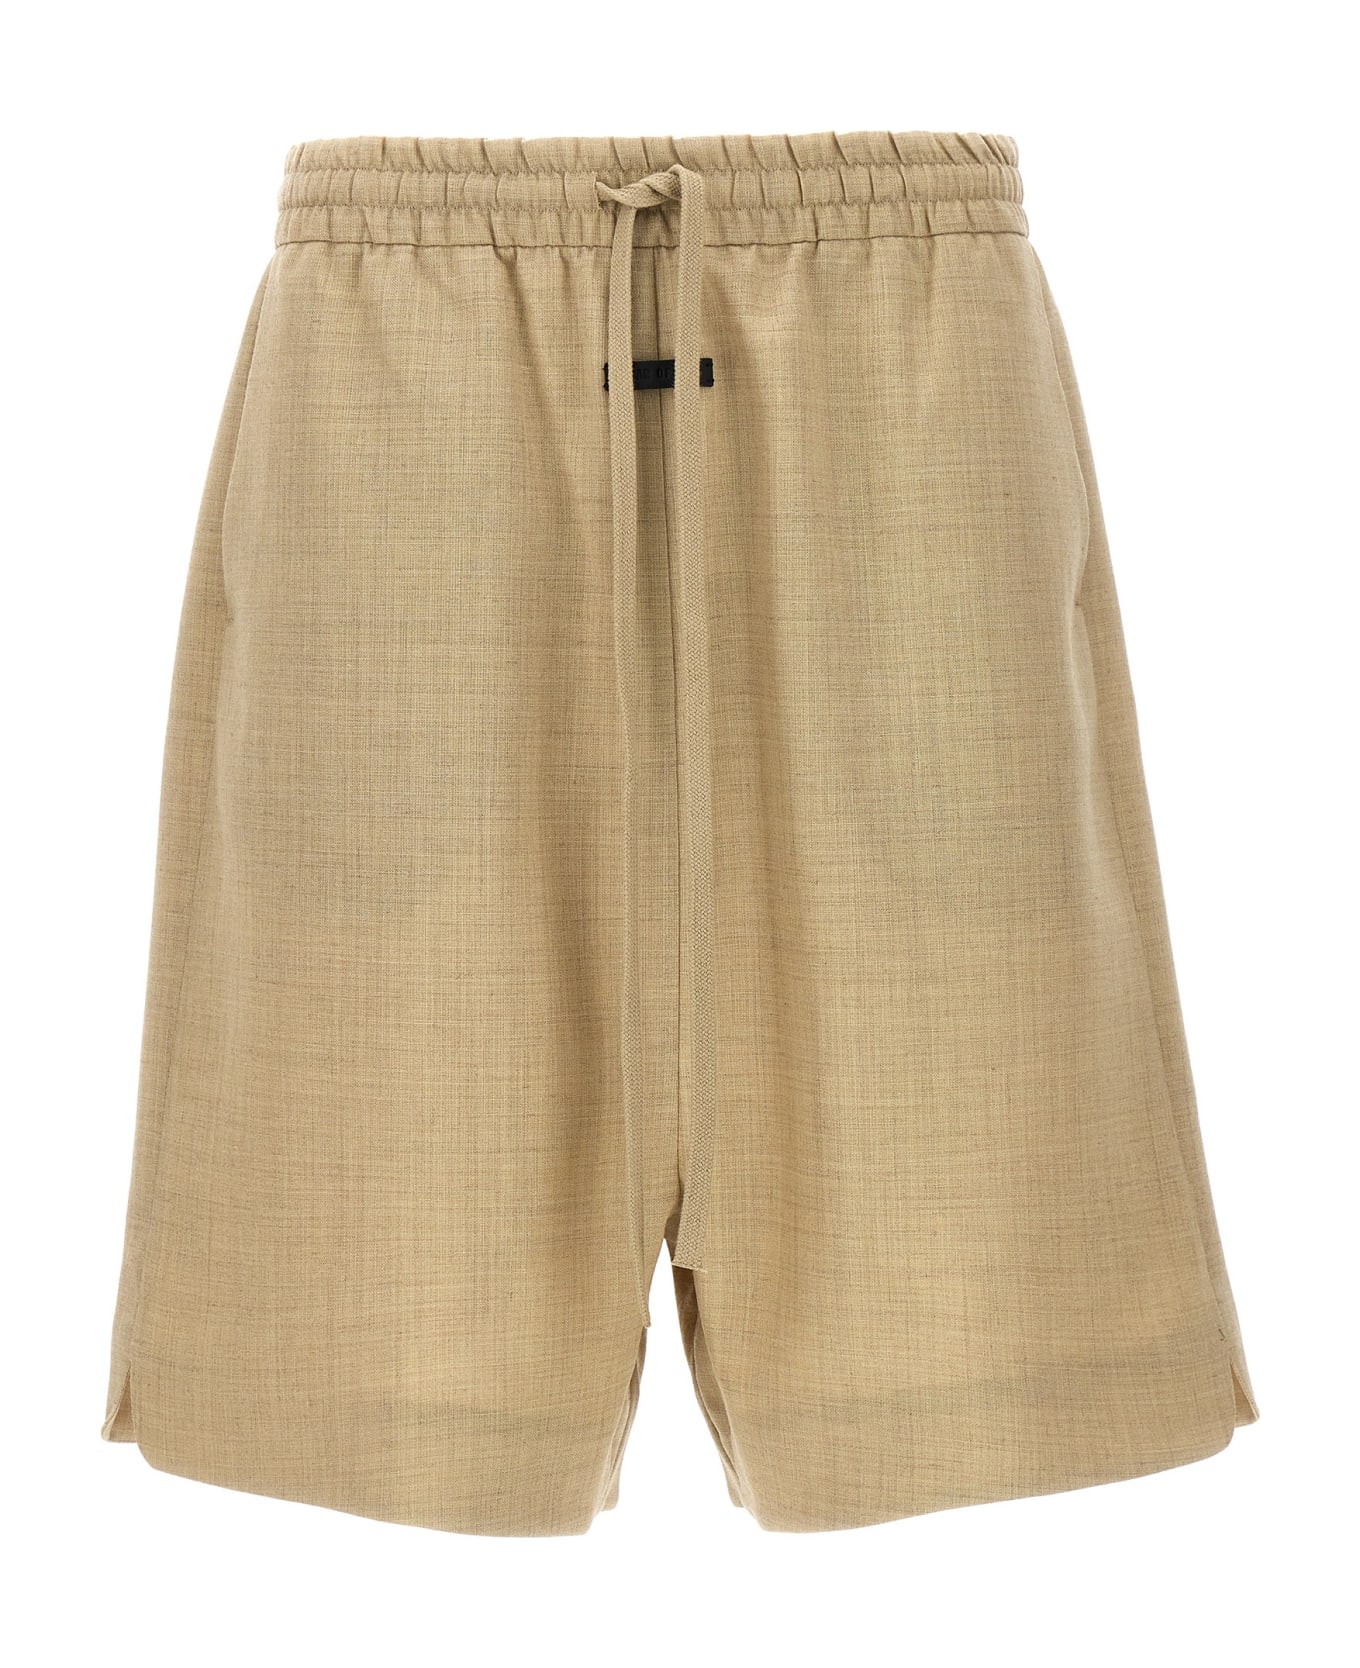 Fear of God 'relaxed' Shorts - Beige ショートパンツ